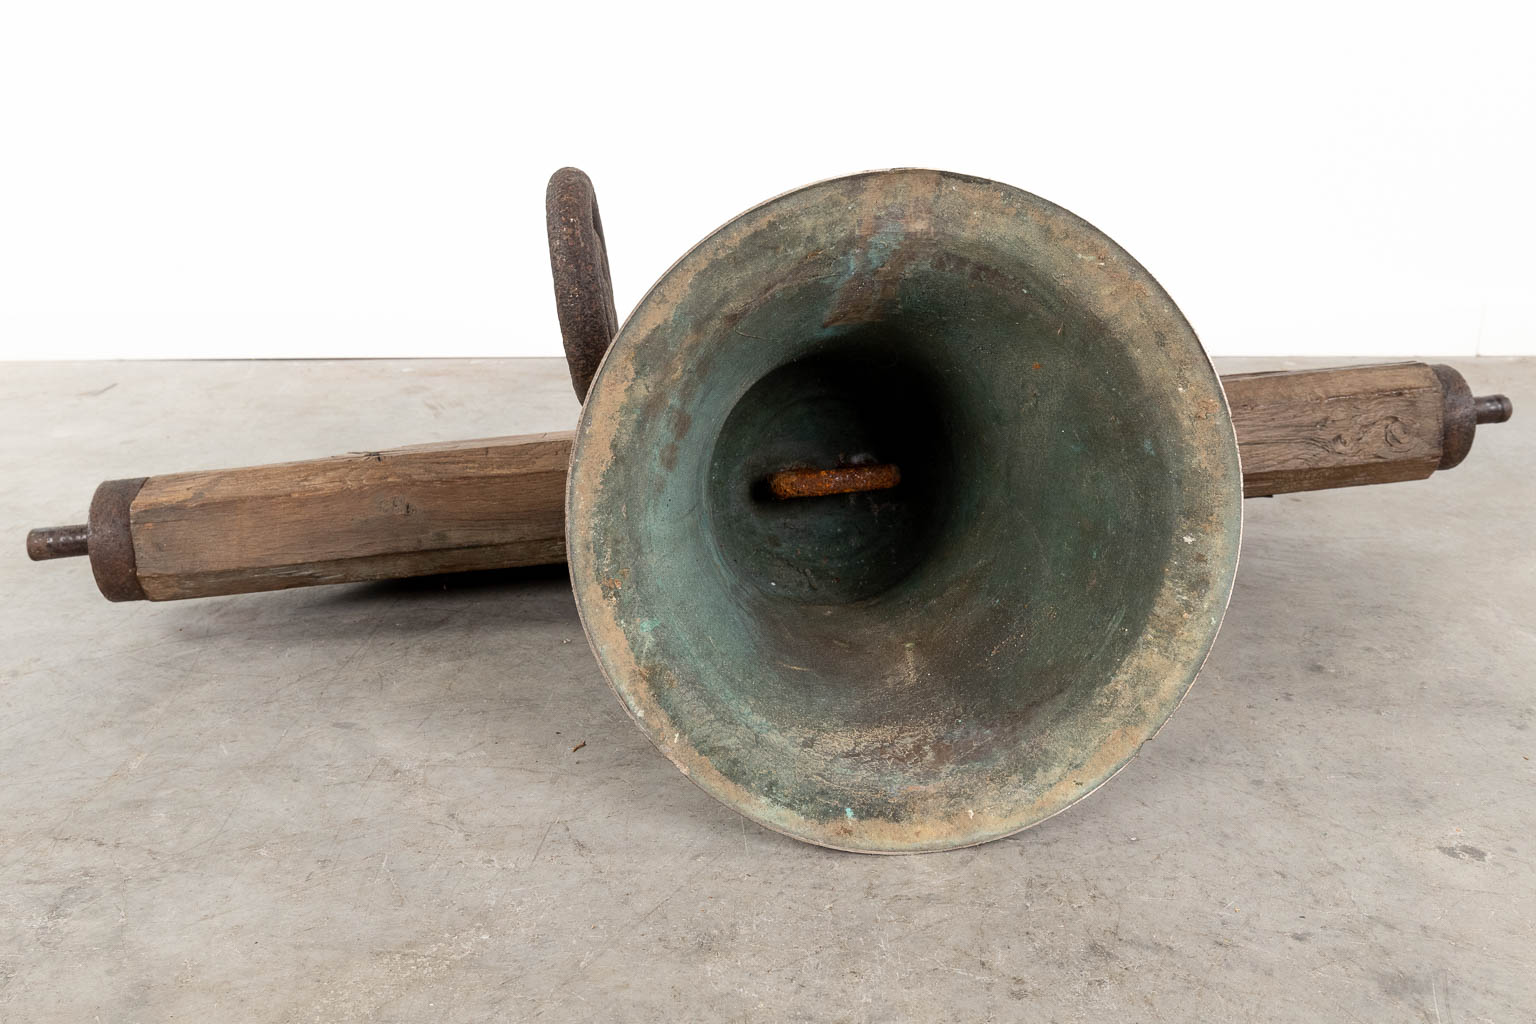 An antique bronze bell mounted on a wood base. 18th C. (W:120 x H:52 x D:36 cm)